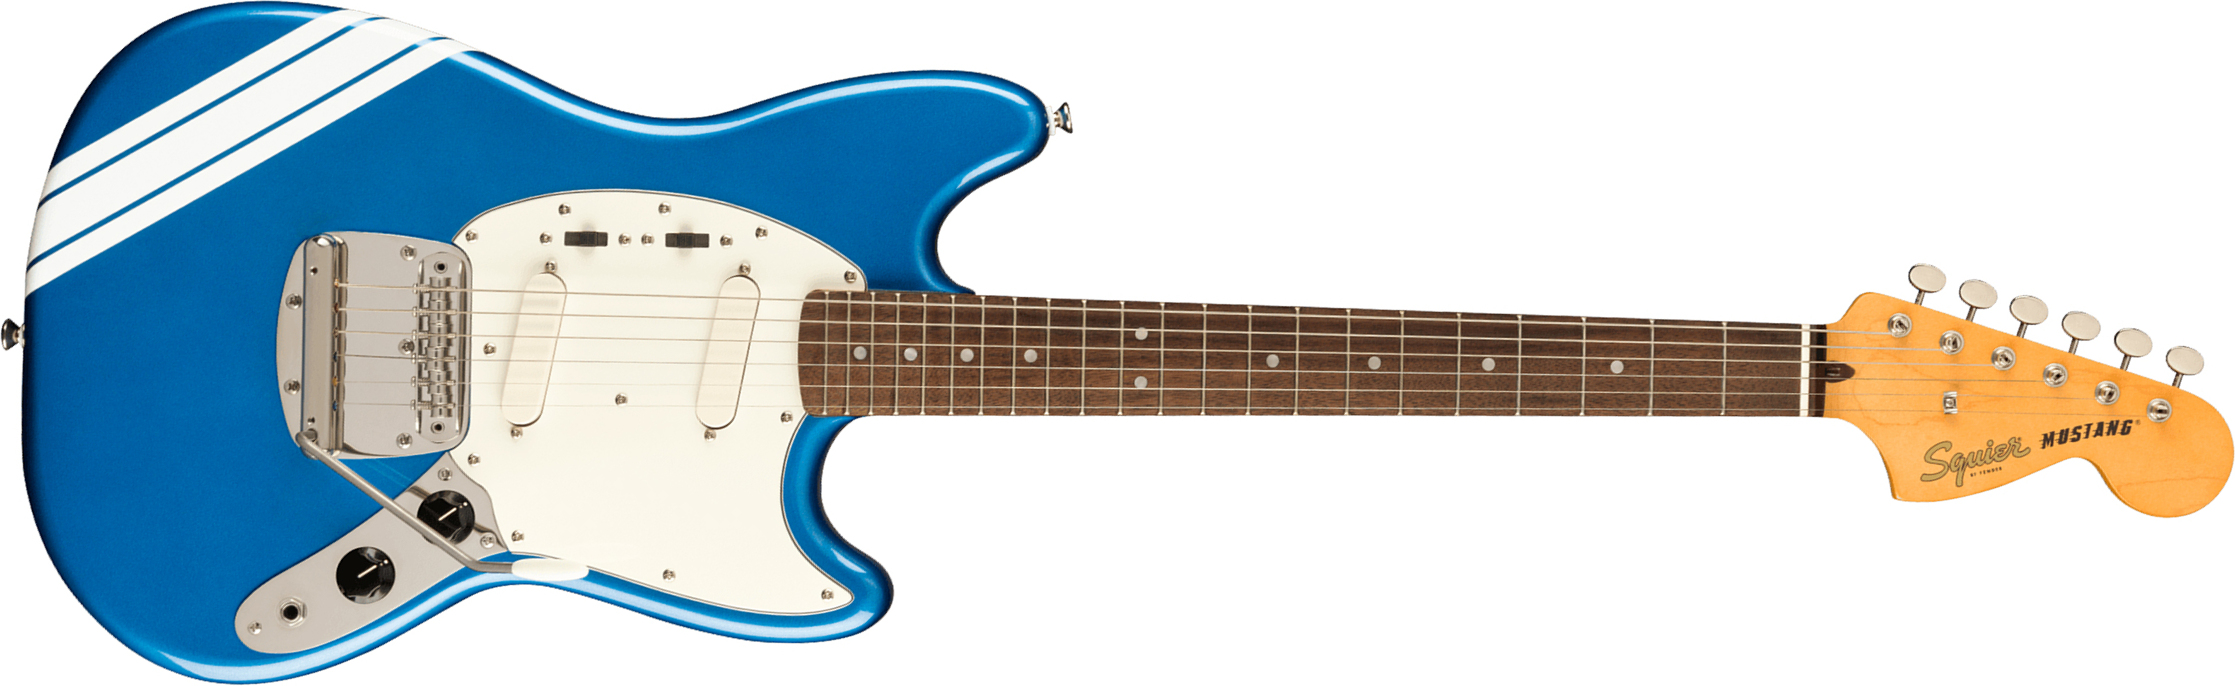 Squier Mustang  Classic Vibe 60s Competition Fsr Ltd Lau - Lake Placid Blue W/ Olympic White Stripes - Guitarra electrica retro rock - Main picture